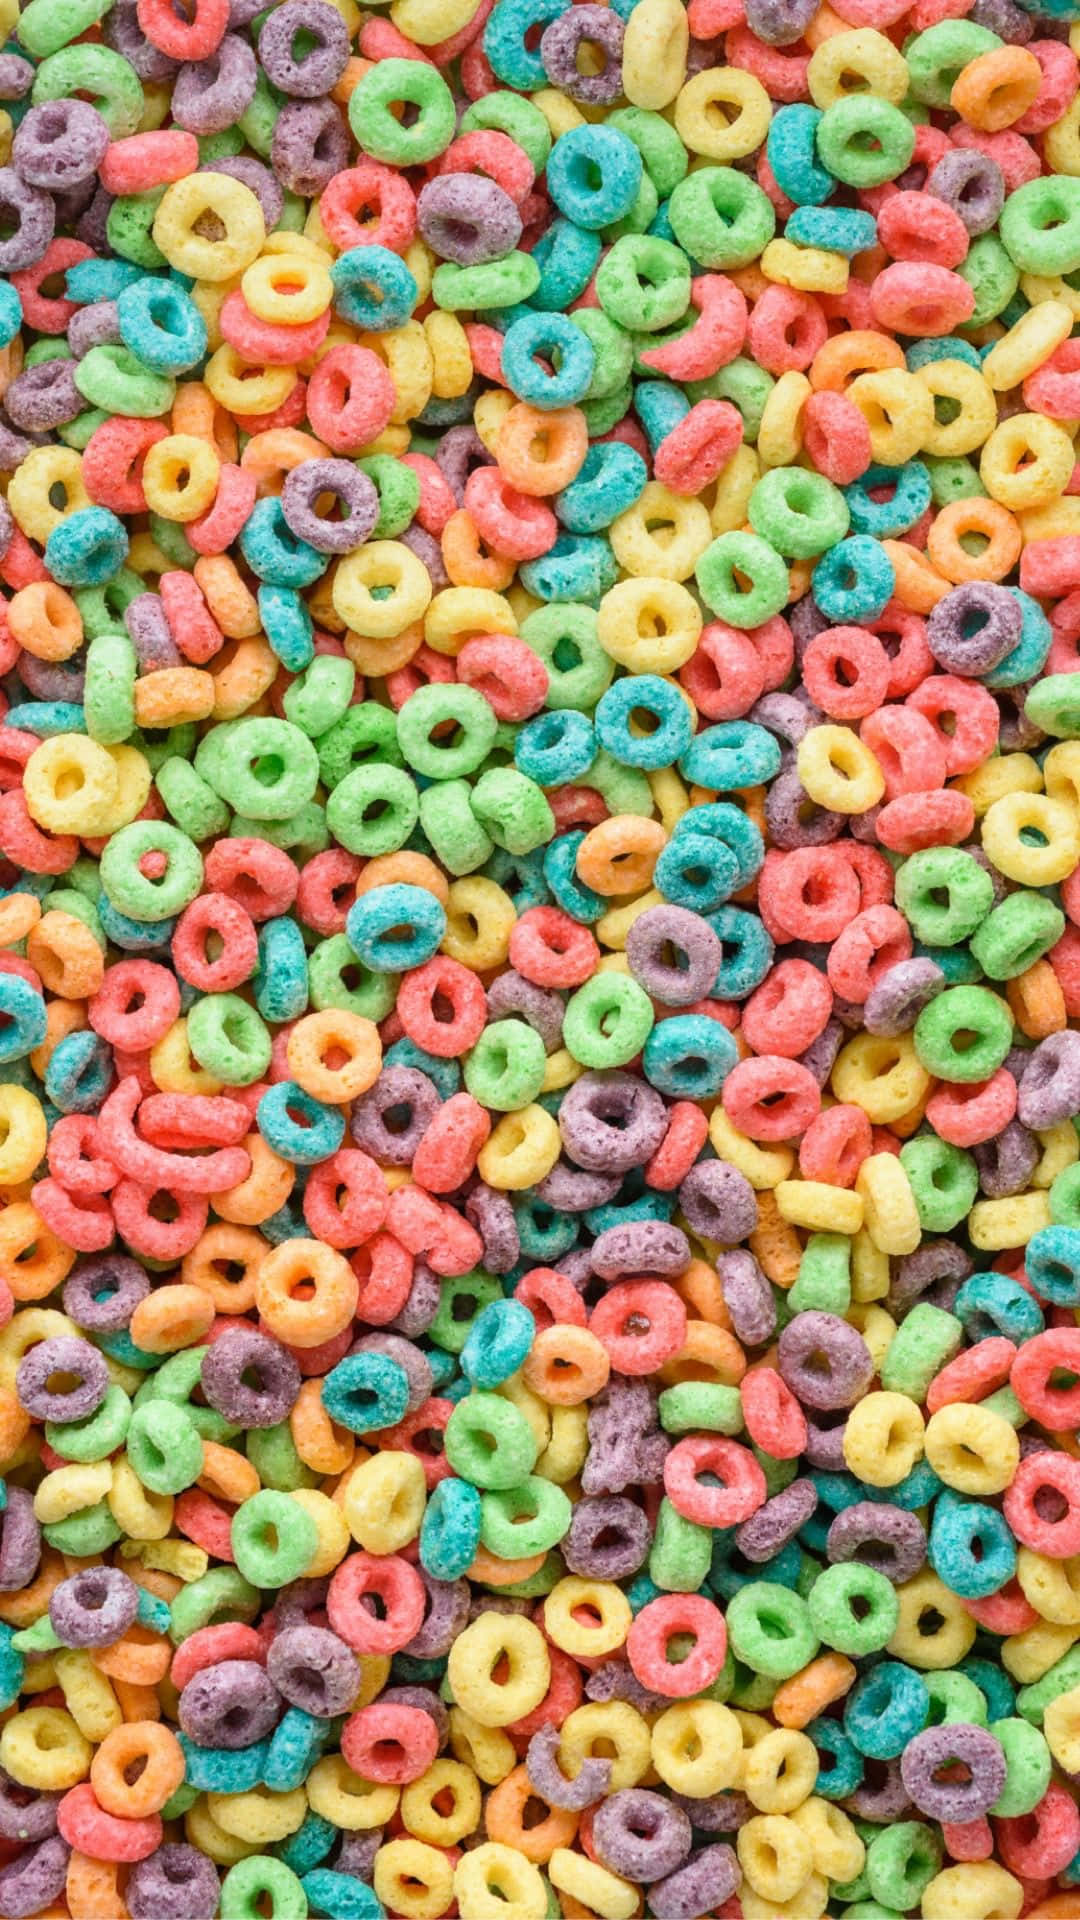 Colorful Cereal Rings In A Pile Wallpaper